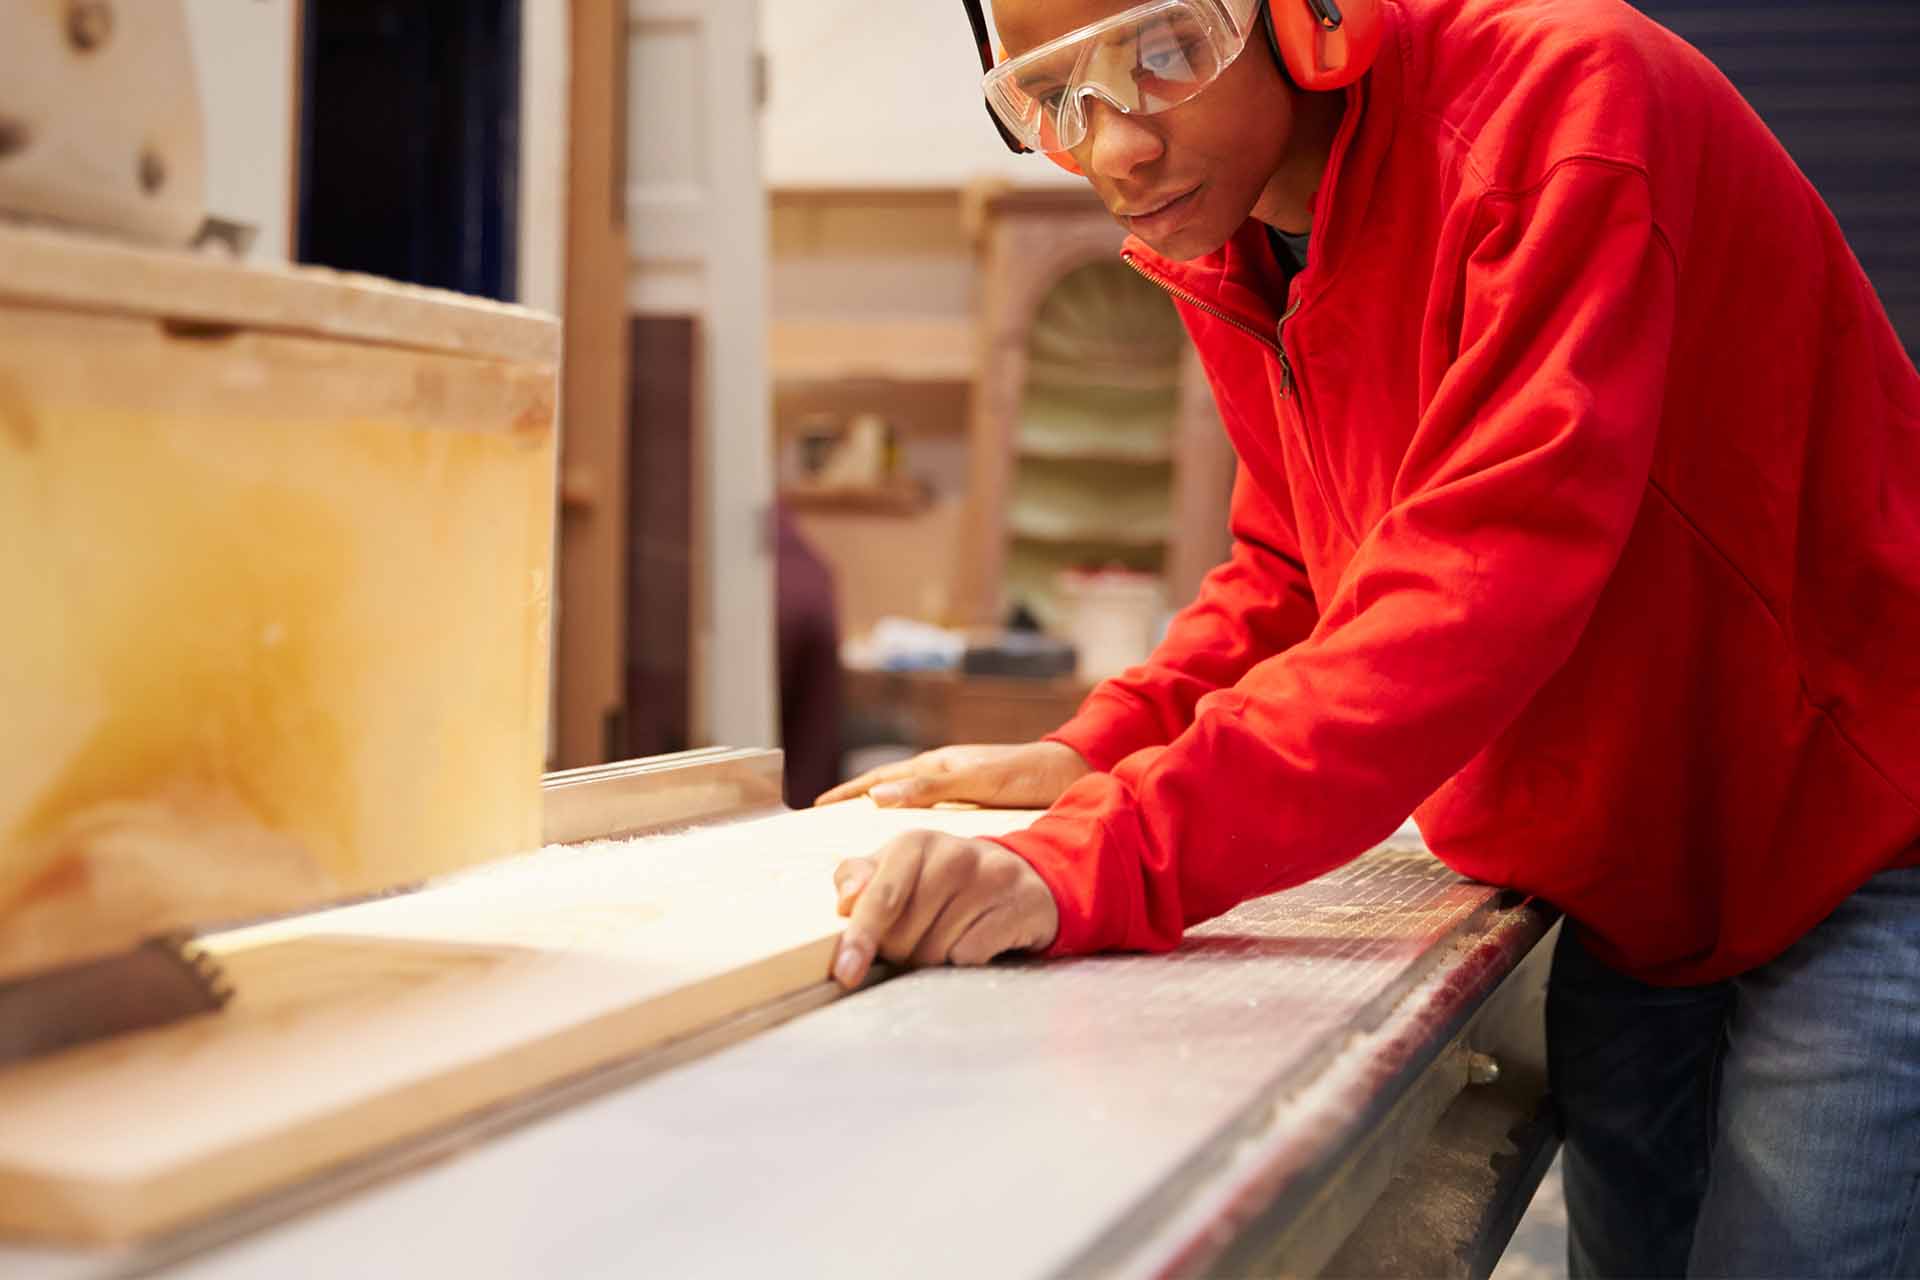 A tradesperson measuring up a plank of wood before sawing it in half